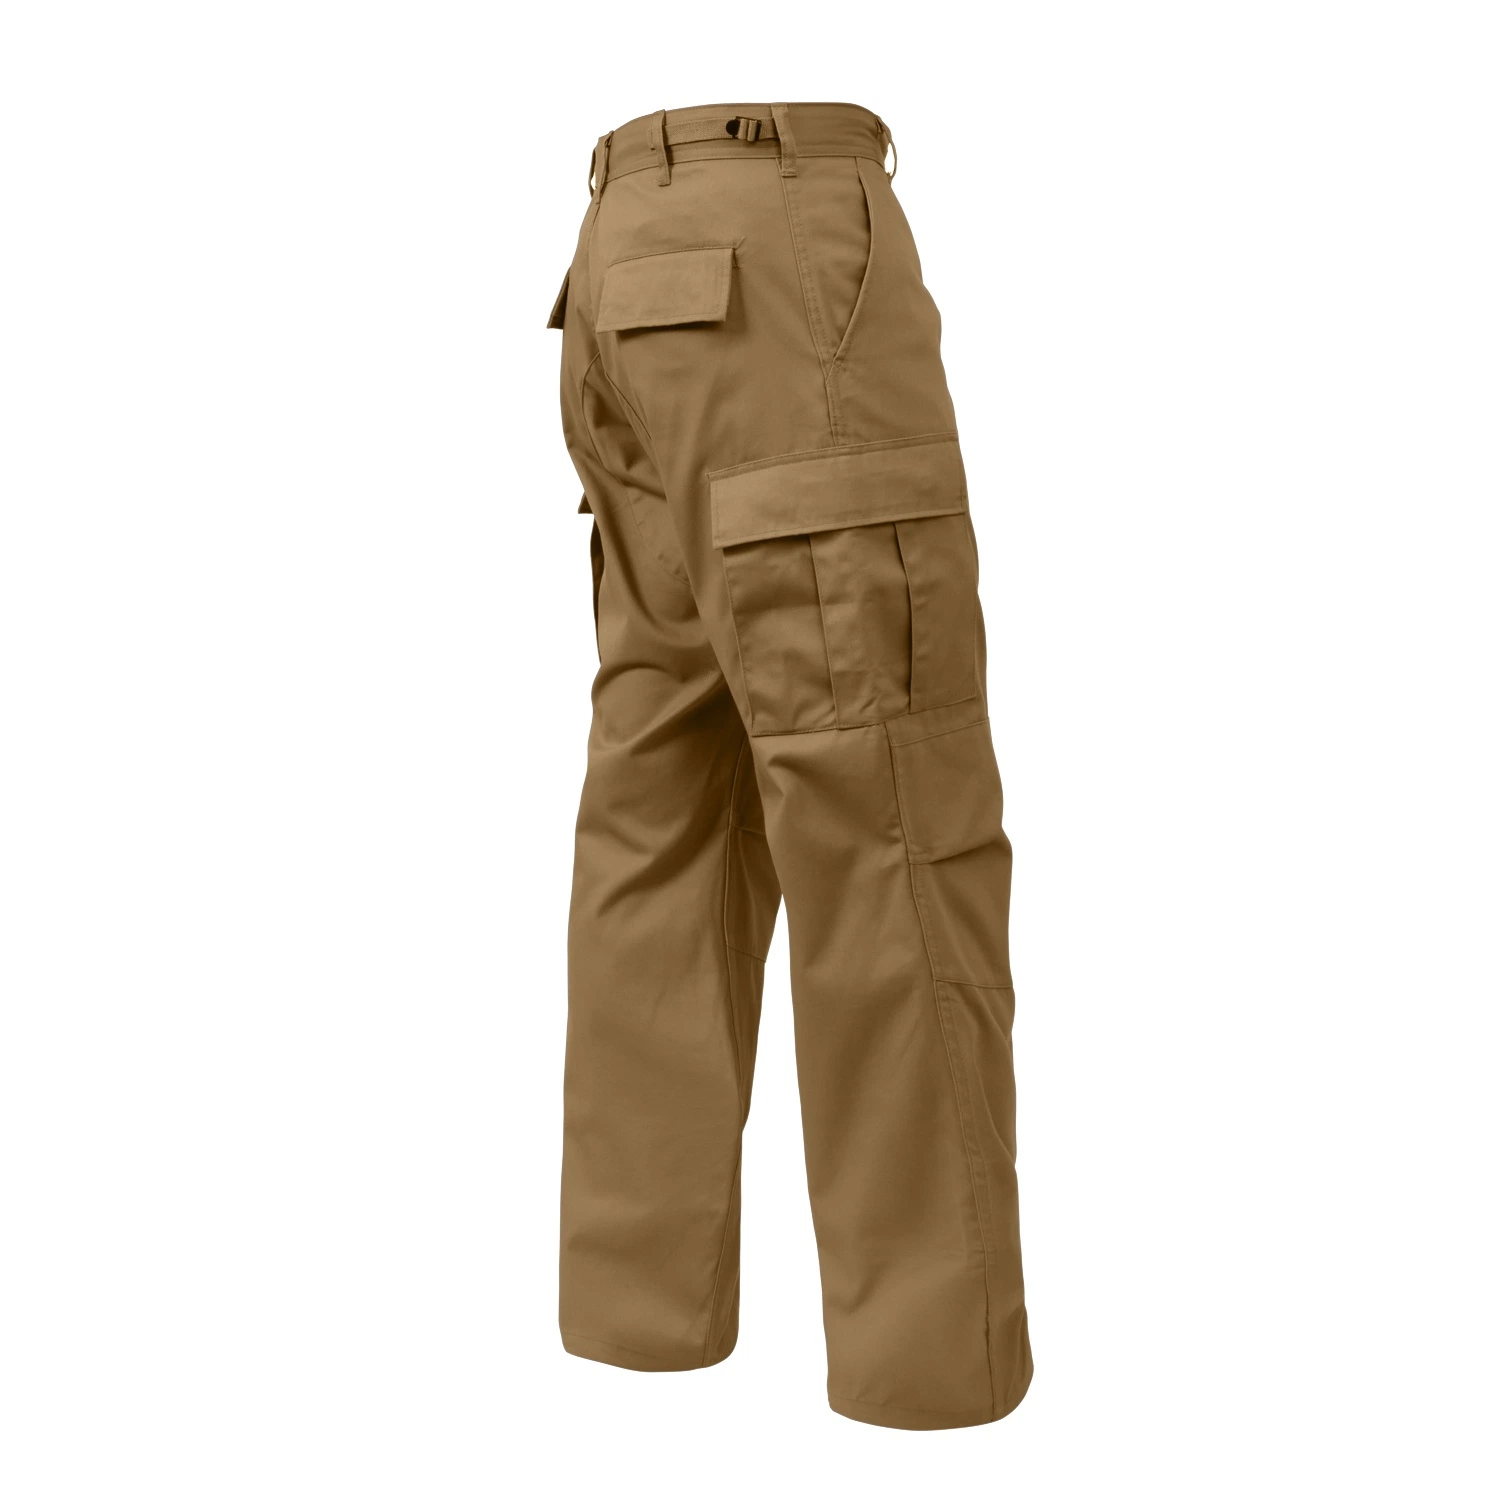 Men's Cargo Trousers Work Wear Cargo Pans with Side Pocket Full Pants Casual Men Hiking Pants Outdoors Trousers Cargo Pants